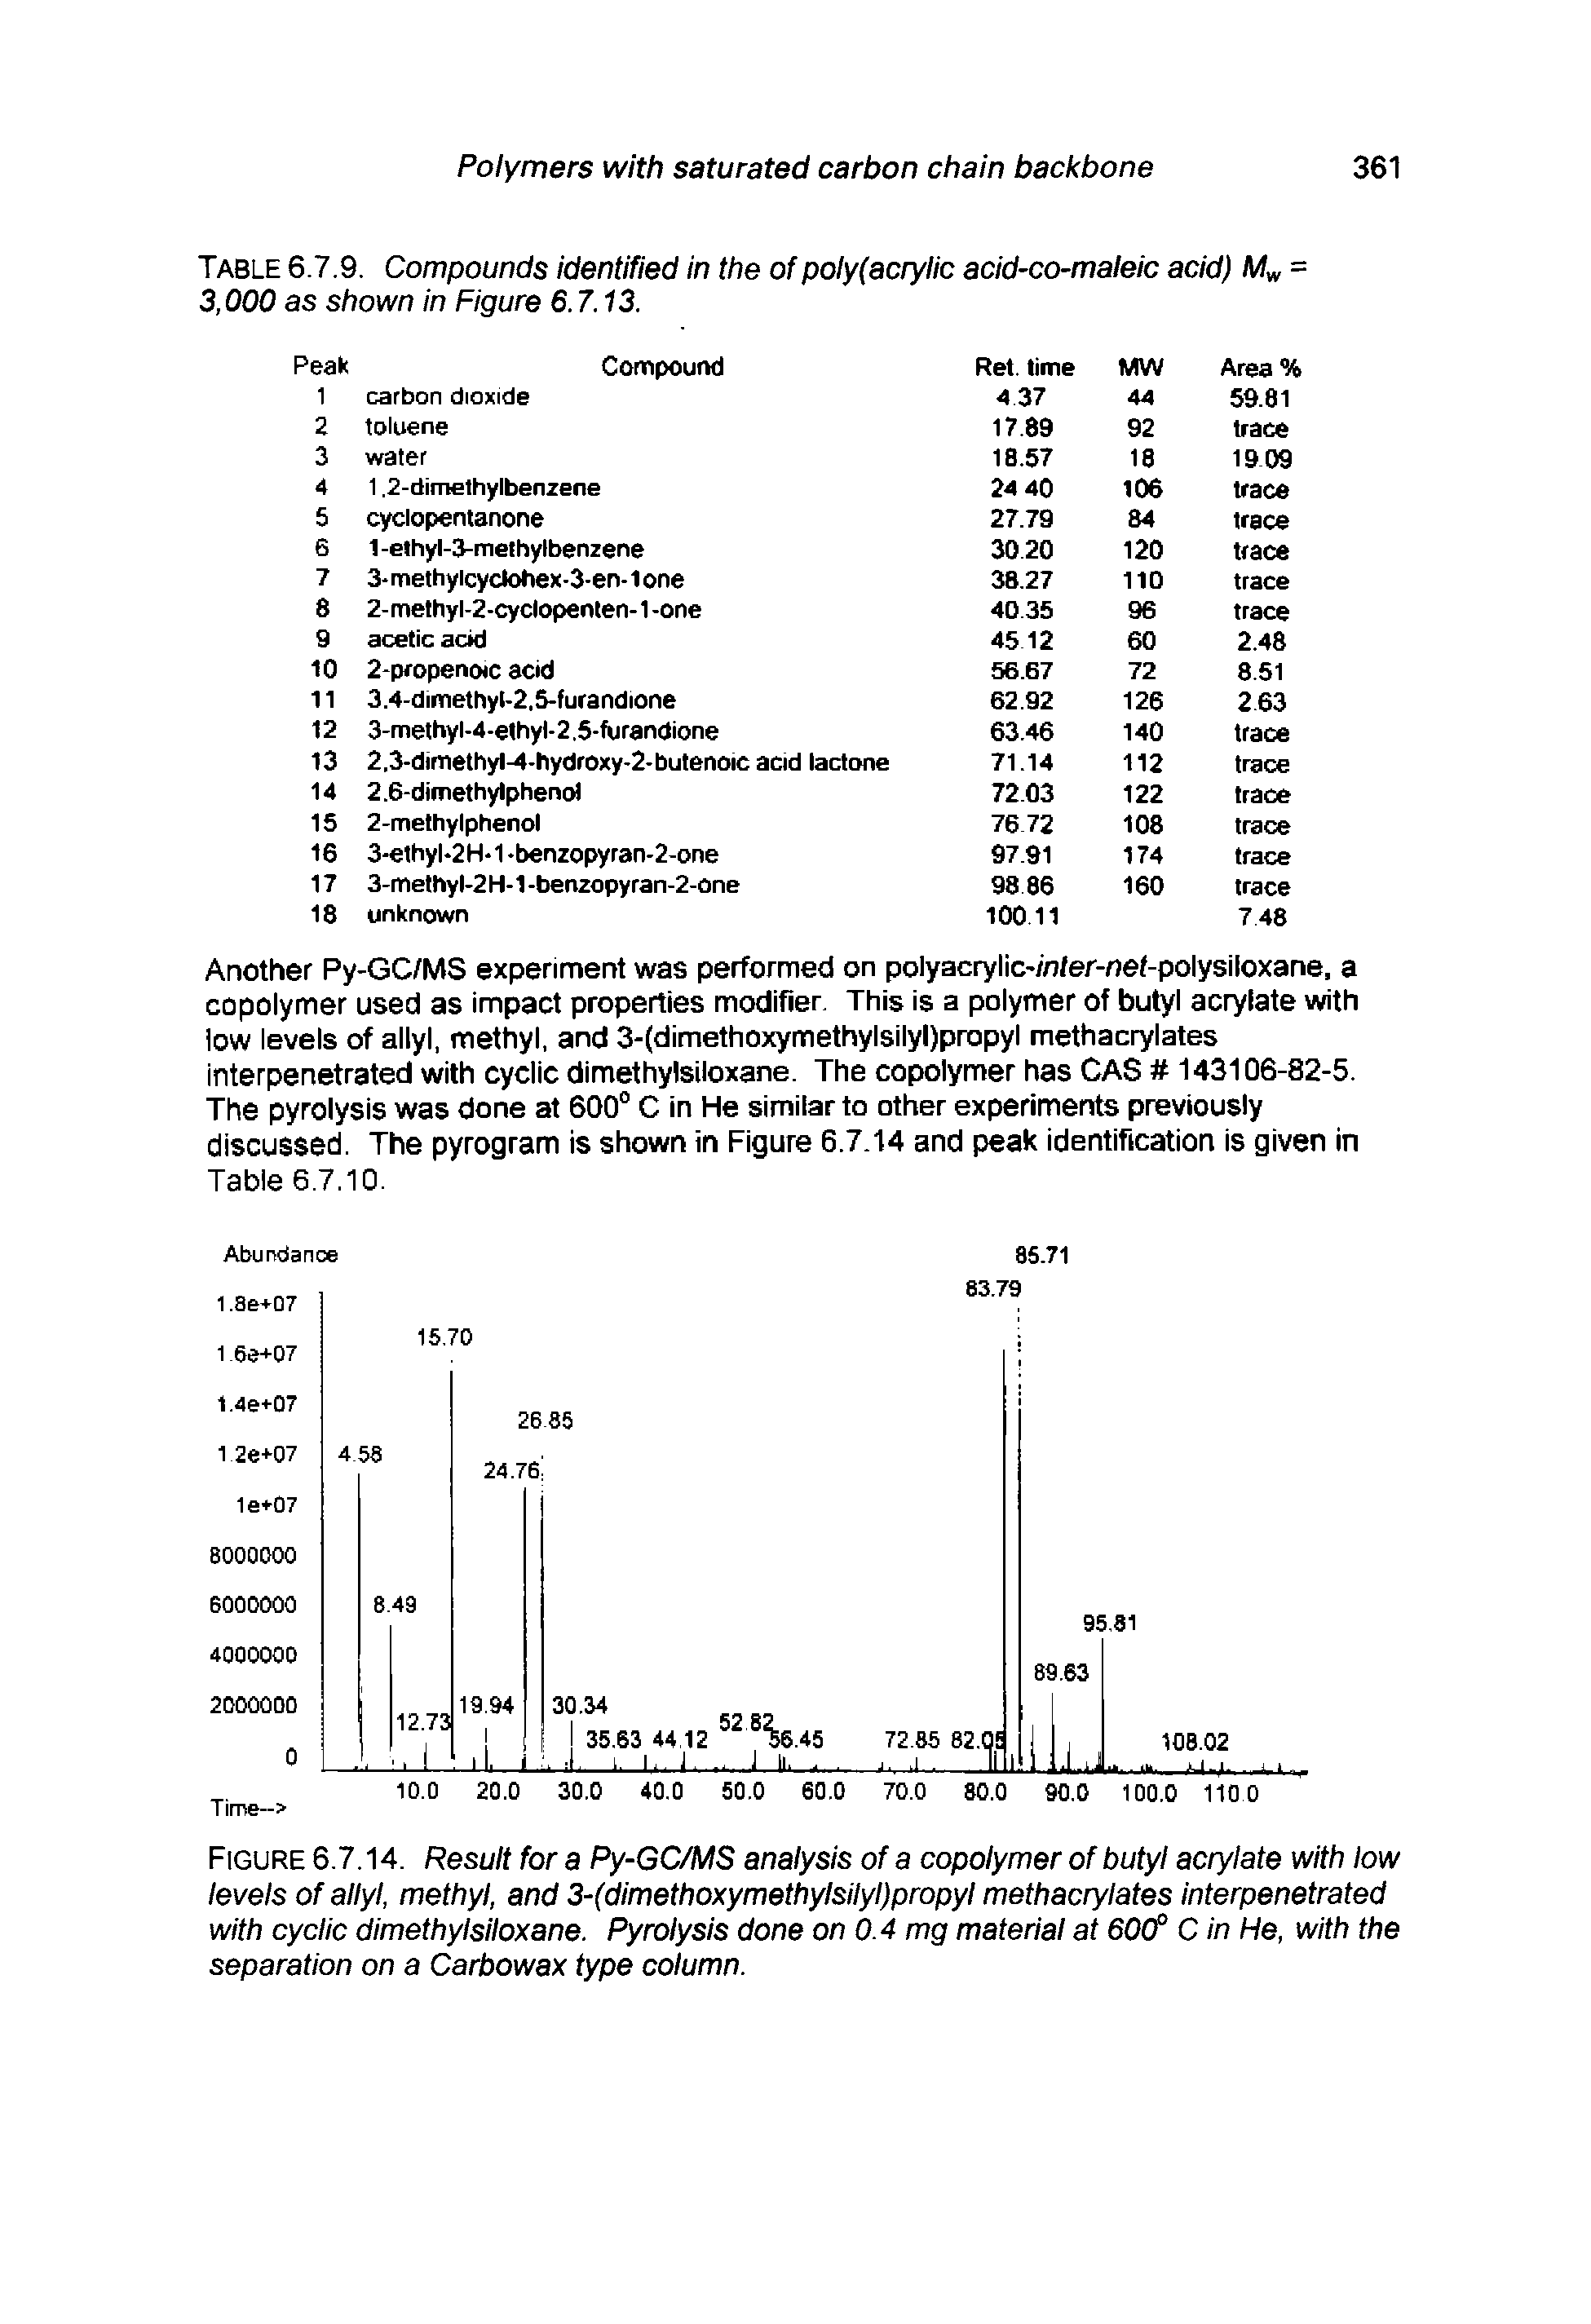 Figure 6.7.14. Result for a Py-GC/MS analysis of a copolymer of butyl acrylate with low levels of allyl, methyl, and 3-(dimethoxymethylsllyl)propyl methacrylates Interpenetrated with cyclic dimethylsiloxane. Pyrolysis done on 0.4 mg material at 60(f C in He, with the separation on a Carbowax type column.